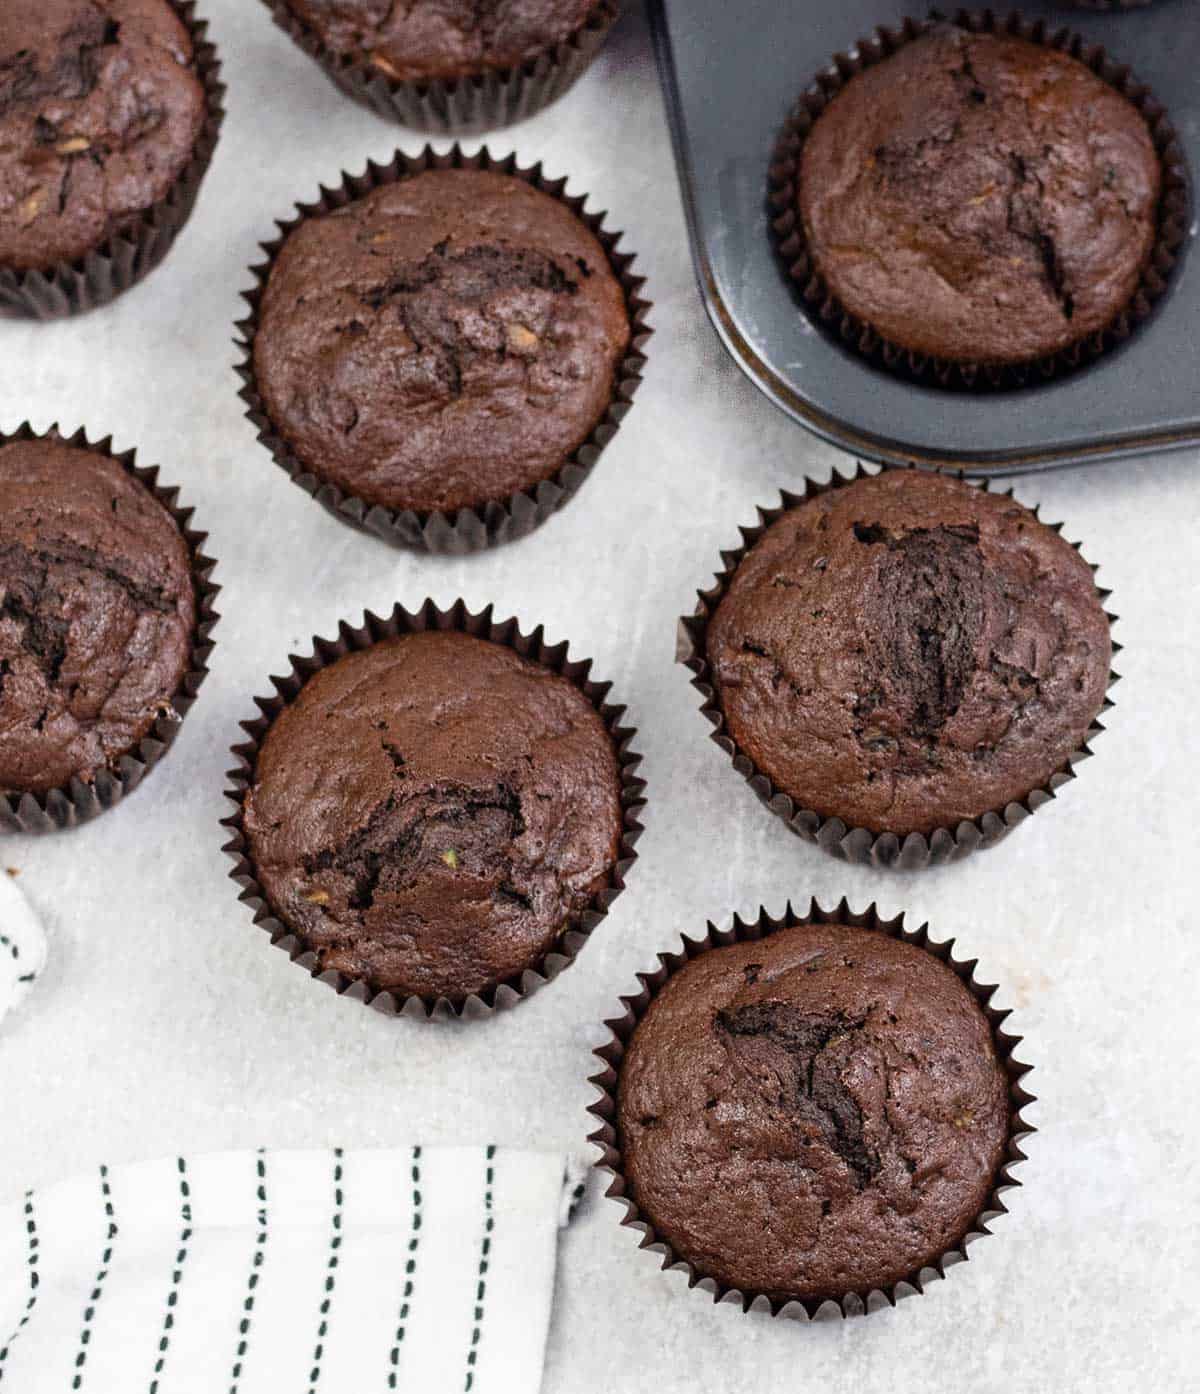 Chocolate Courgette Muffins